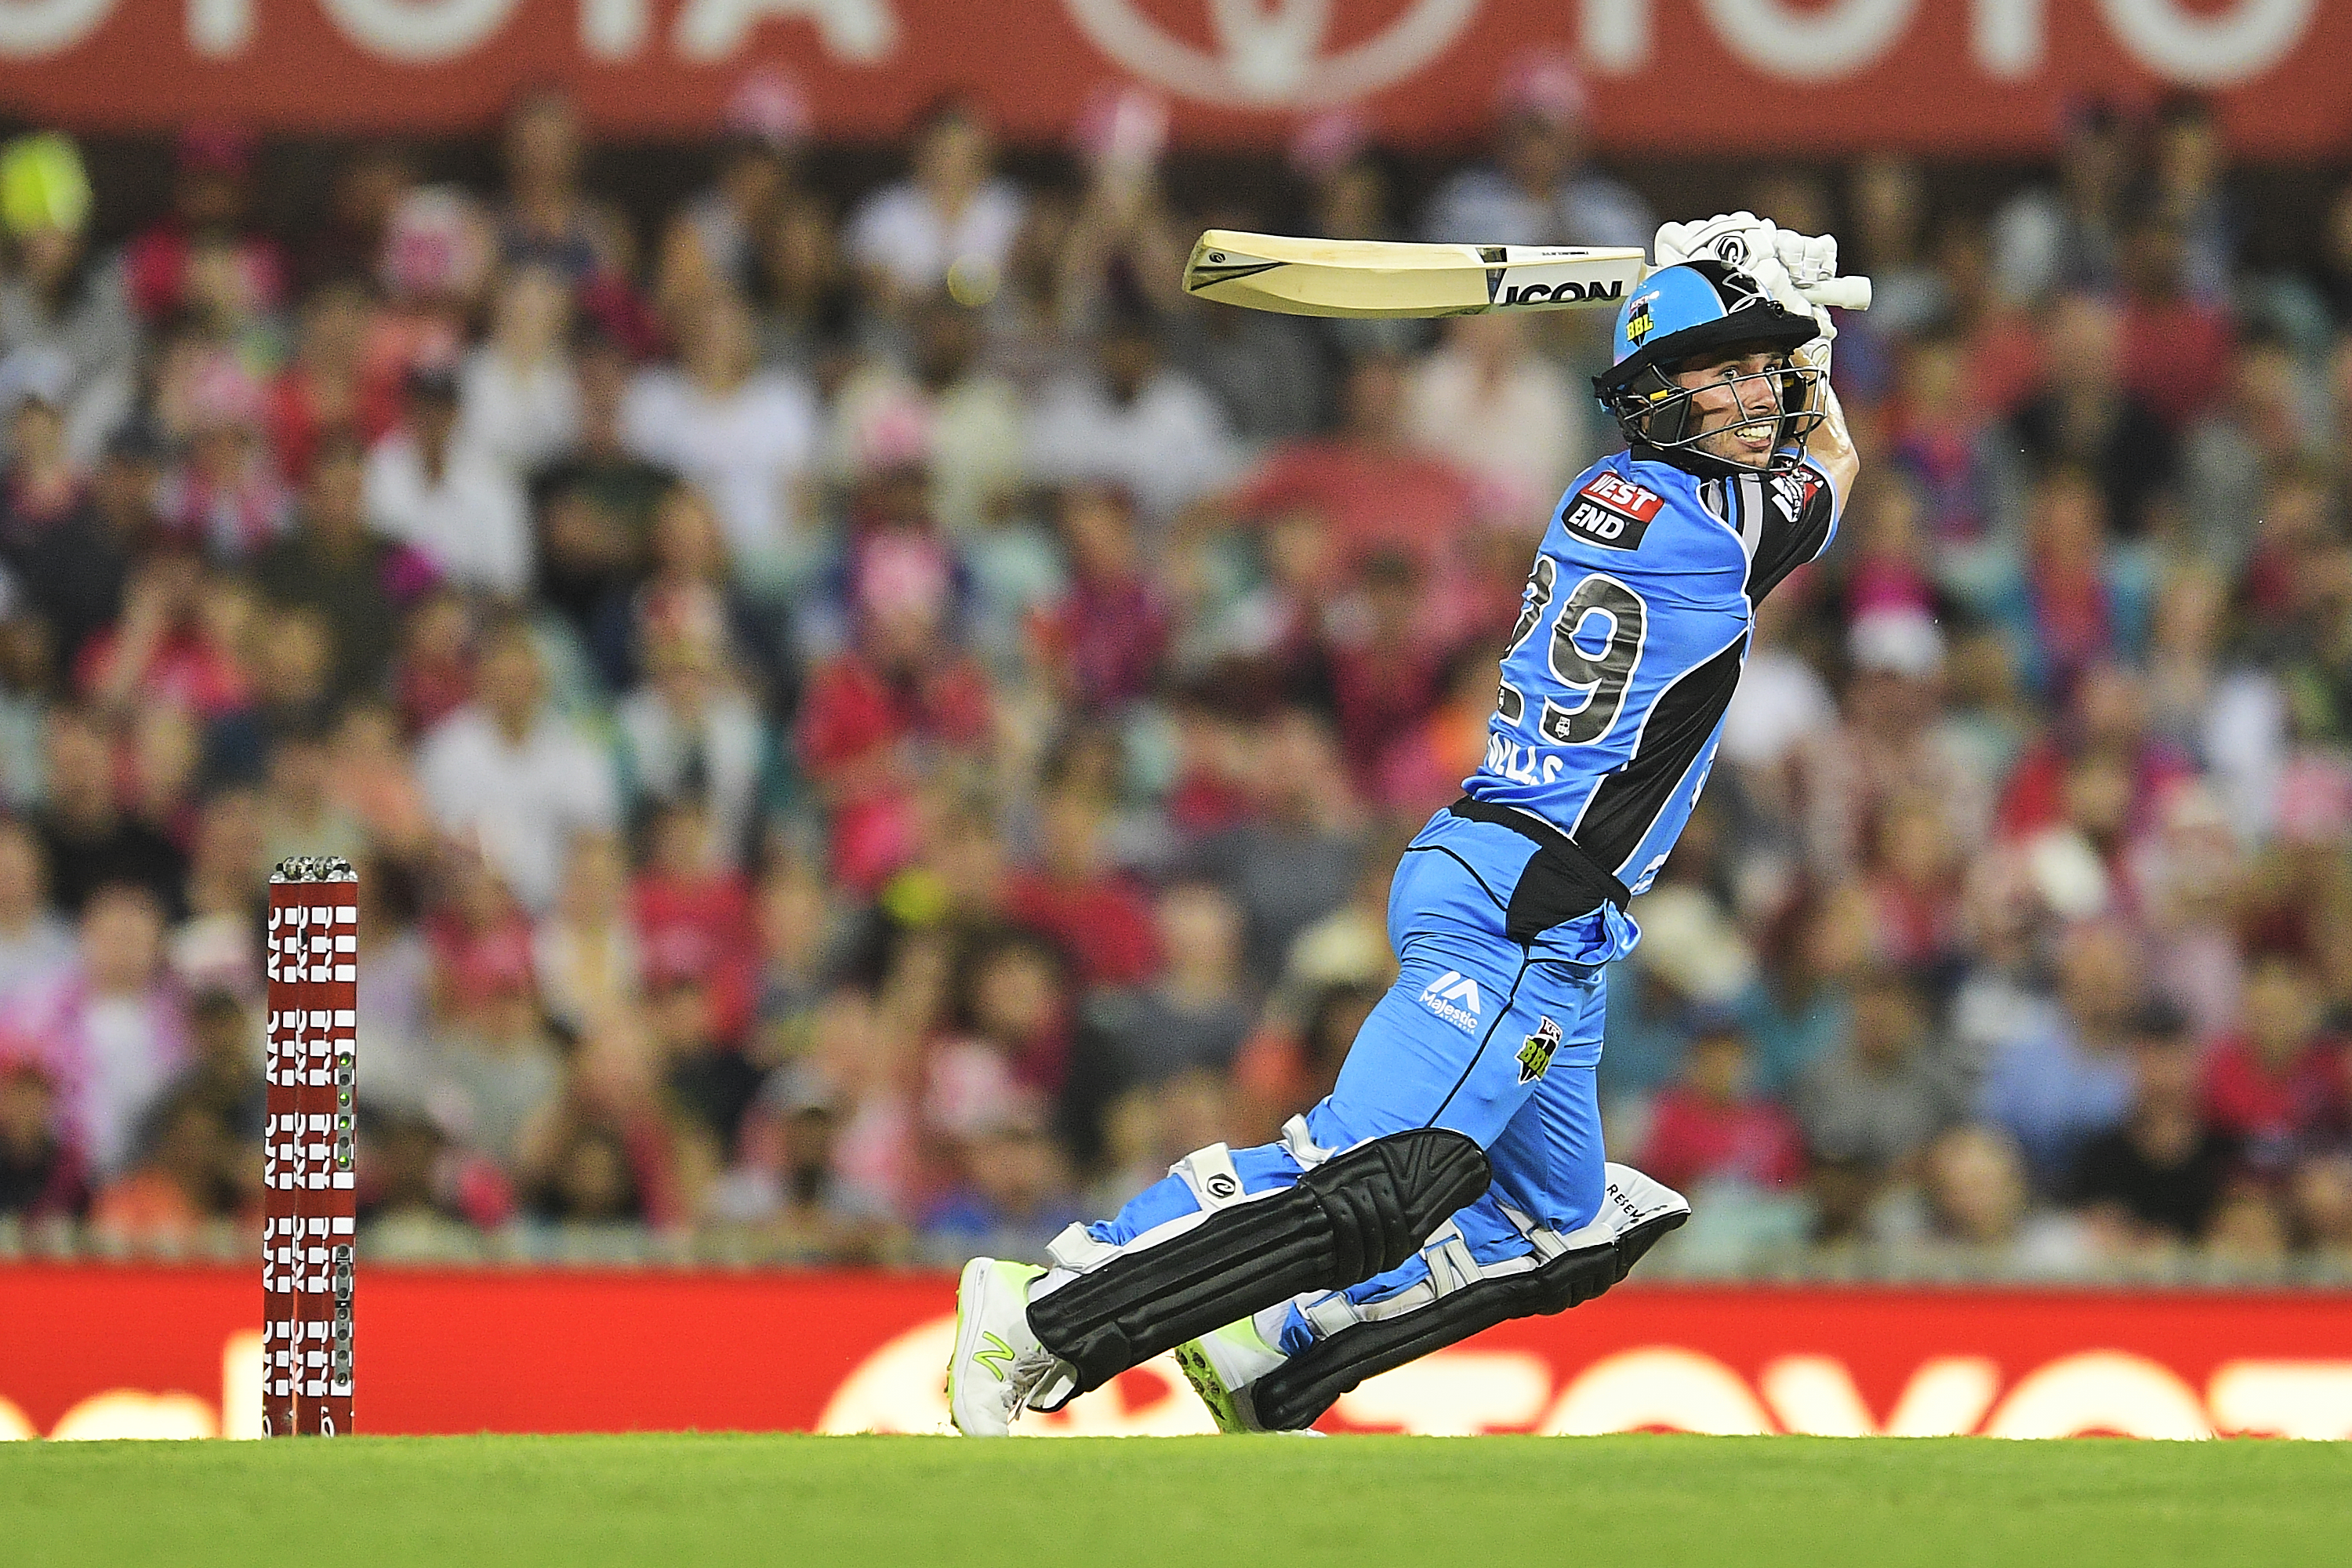 What can Australia take away from BBL 09 ft. big-hitter scarcity and golden wicket-keeper era